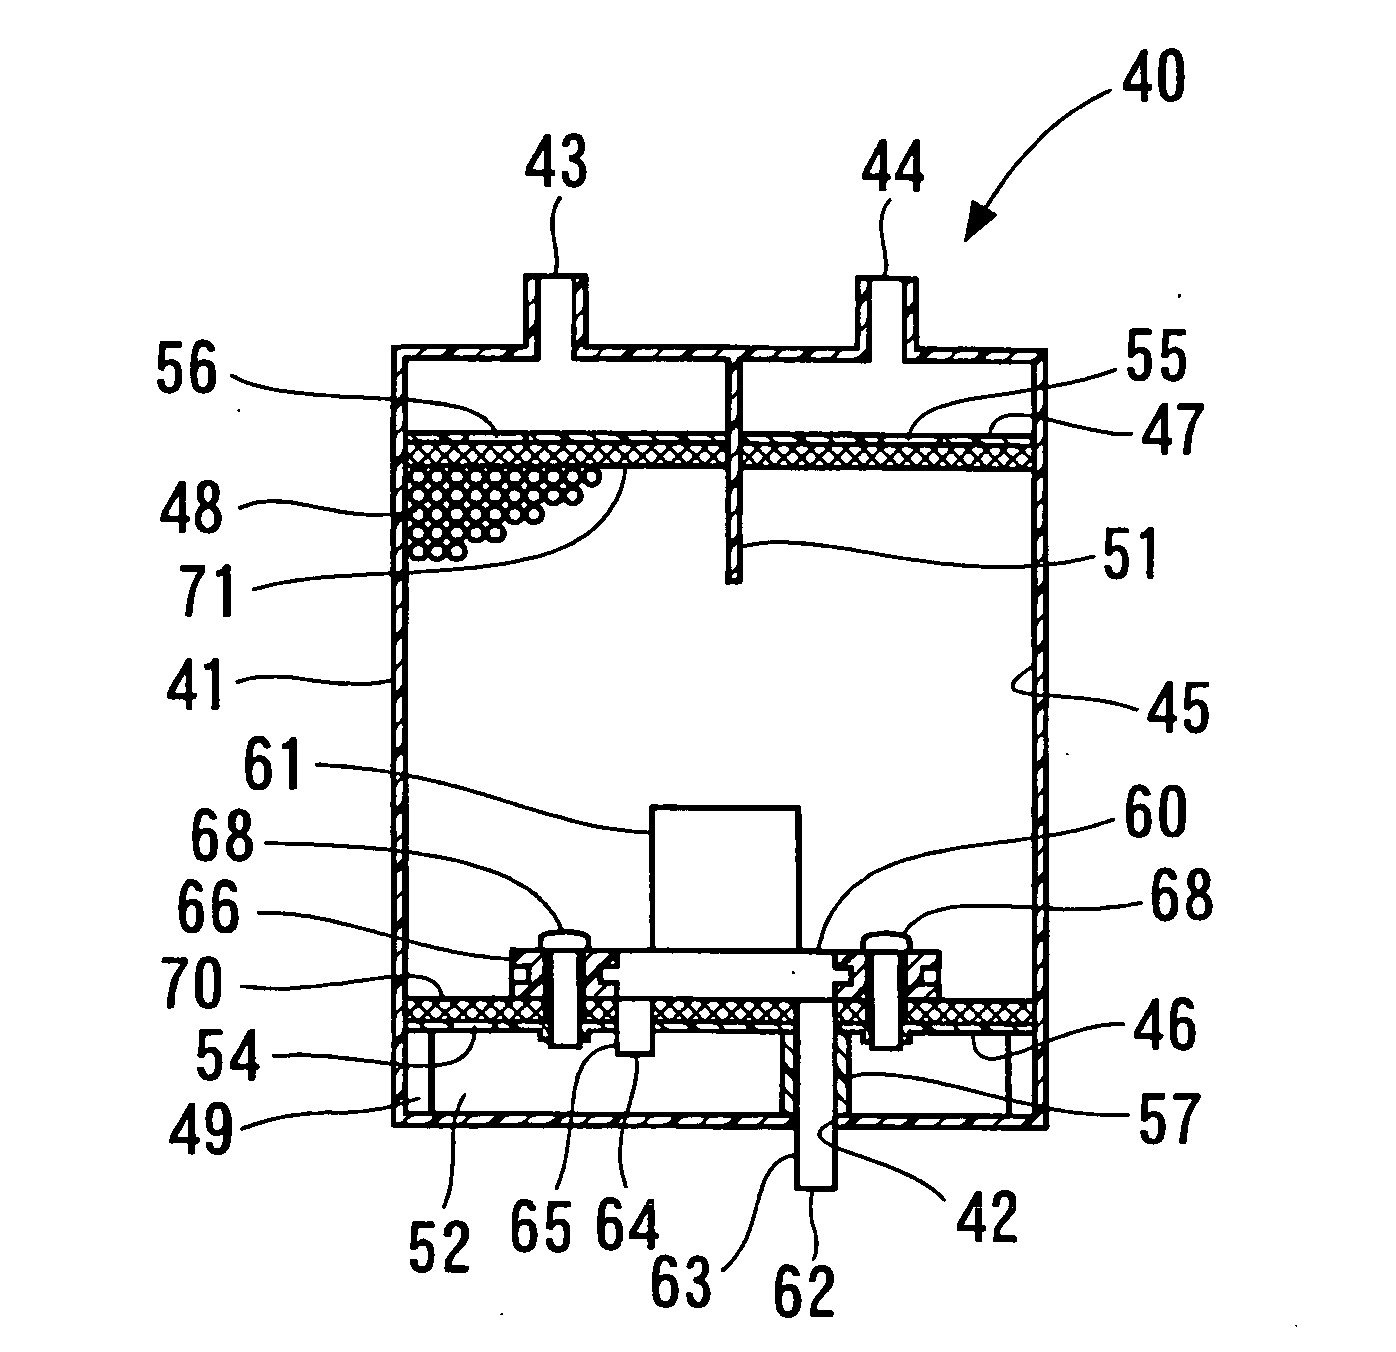 Canister having absorbent and fuel vapor treatment apparatus